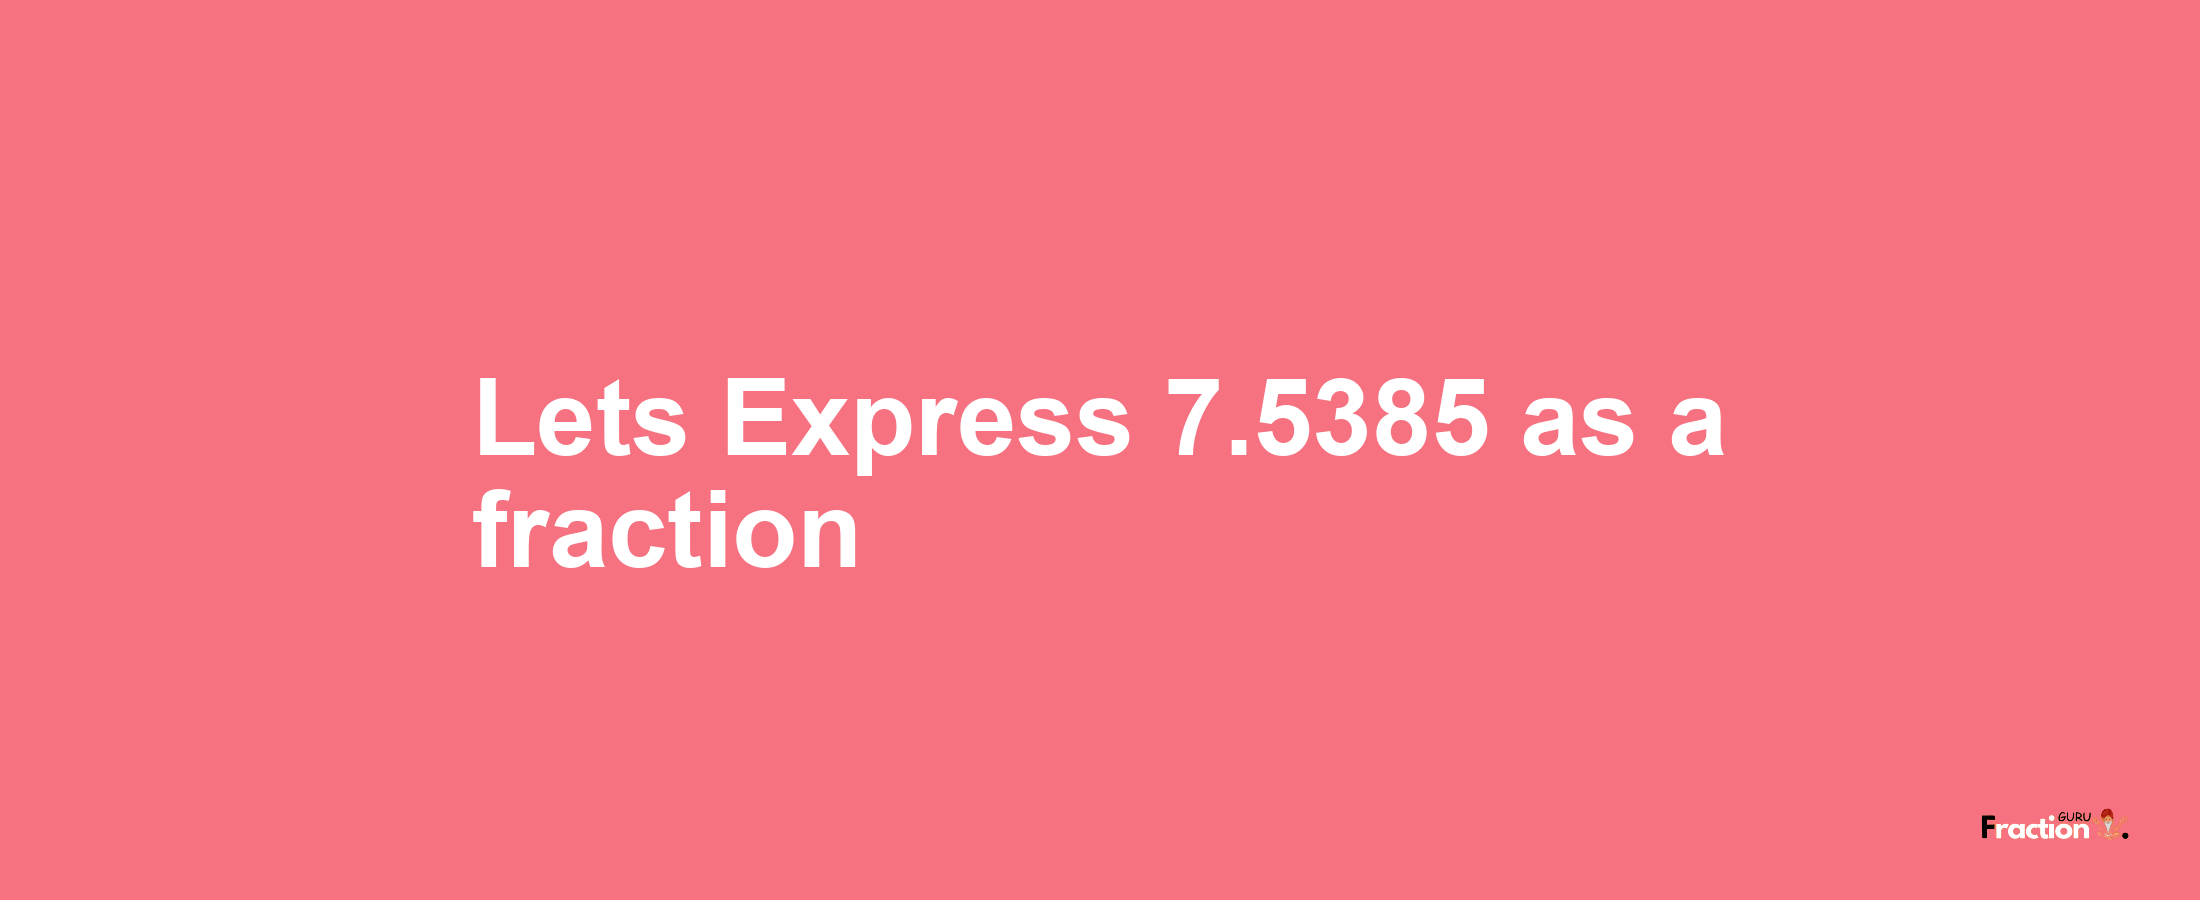 Lets Express 7.5385 as afraction